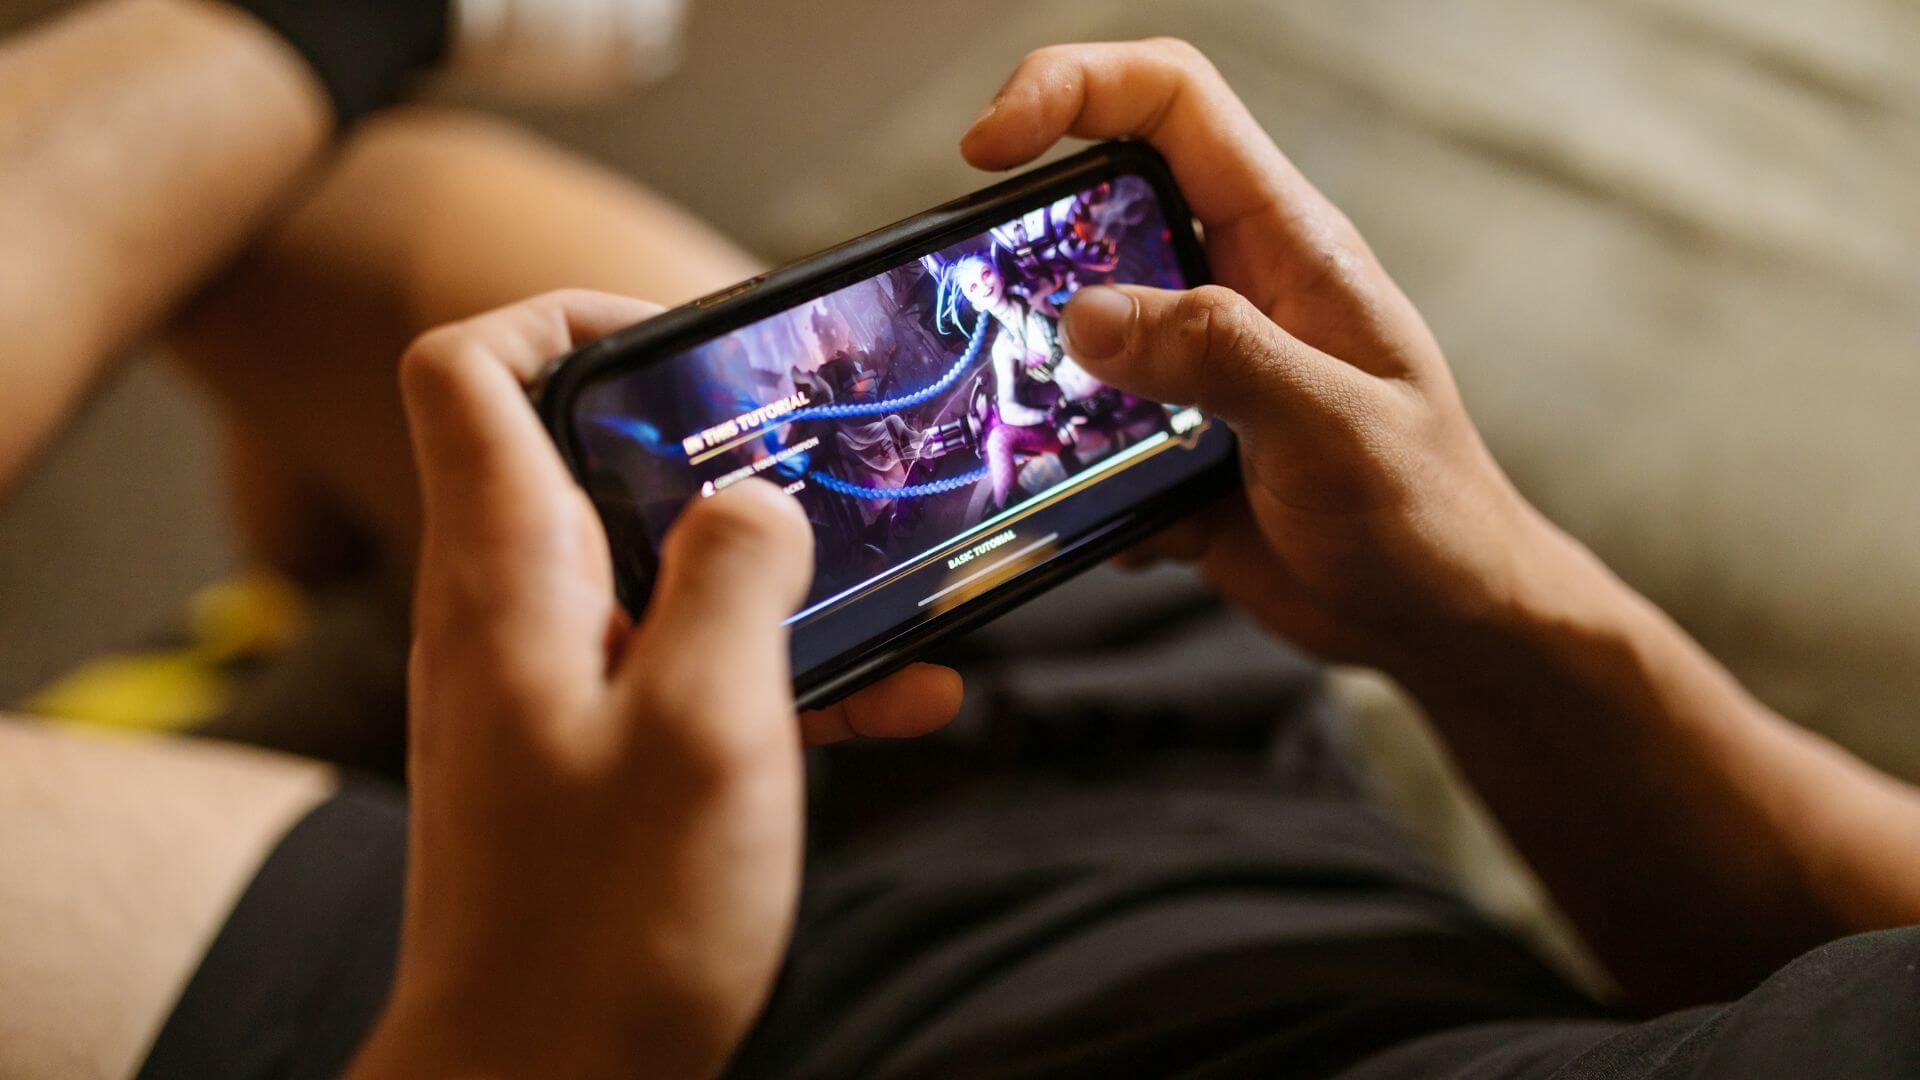 UGC Marketing: How to Get Your Players to Make User-Generated Content